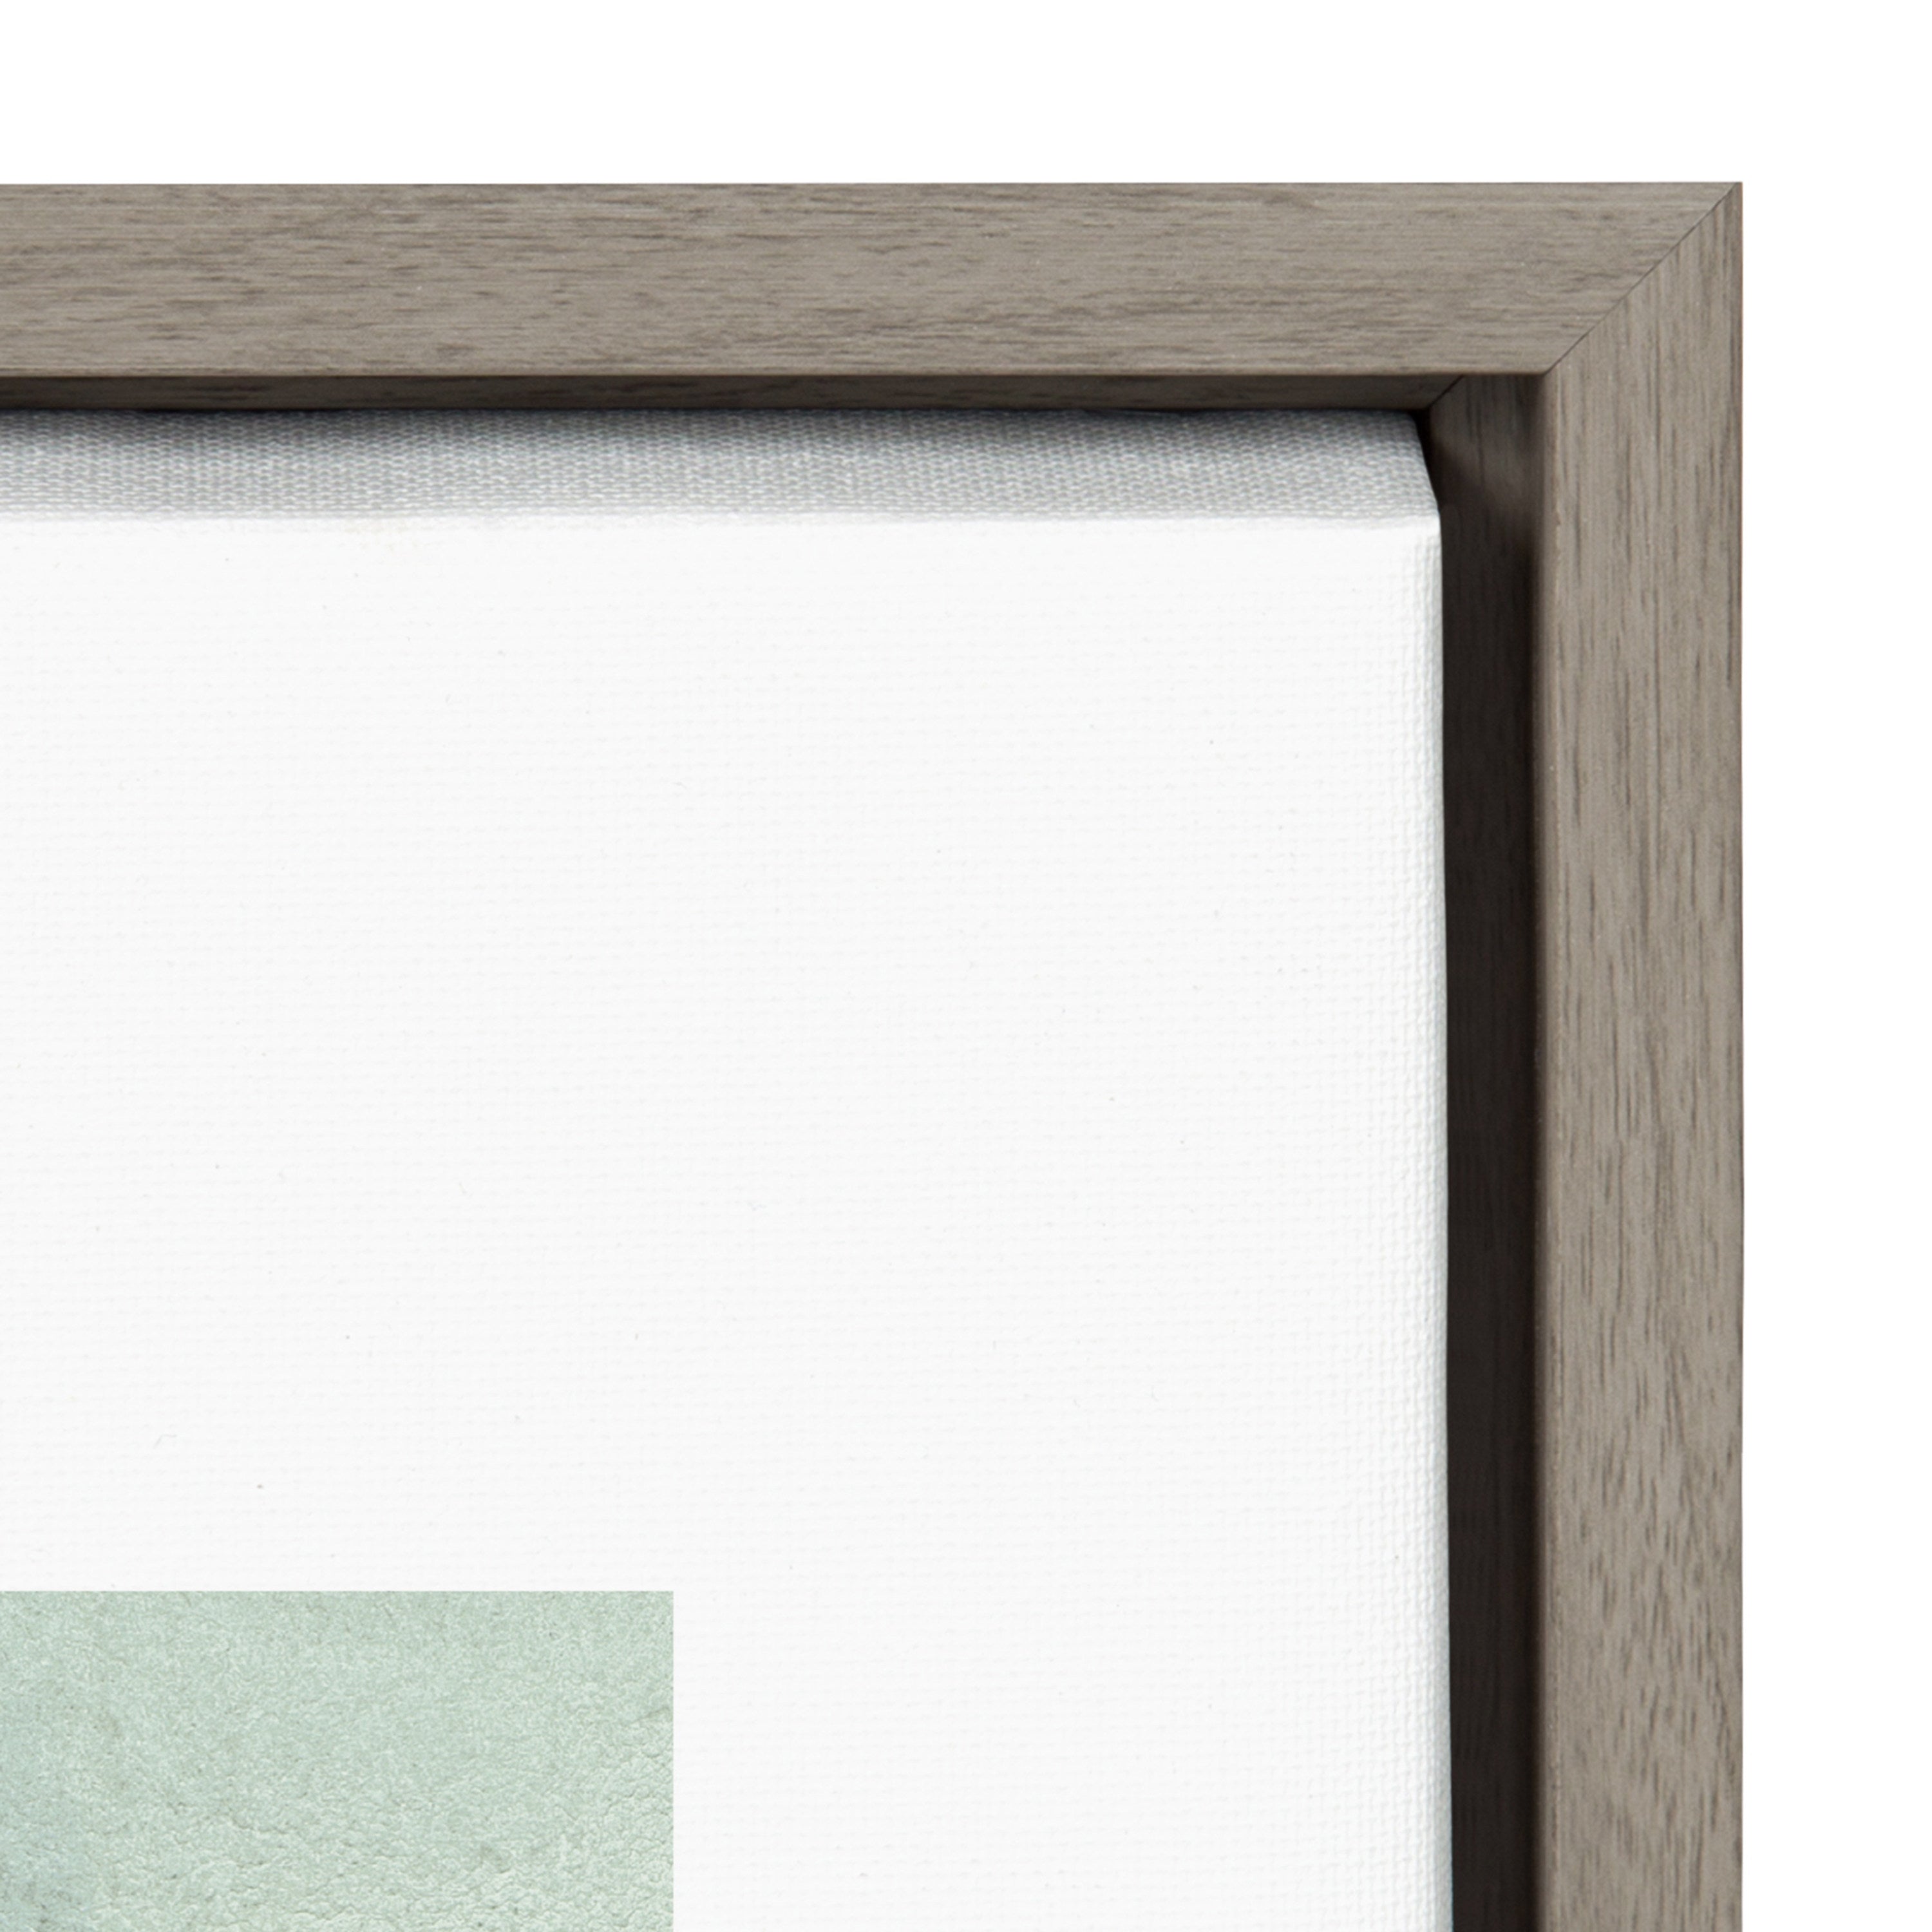 Sylvie Plant Life Framed Canvas by Statement Goods